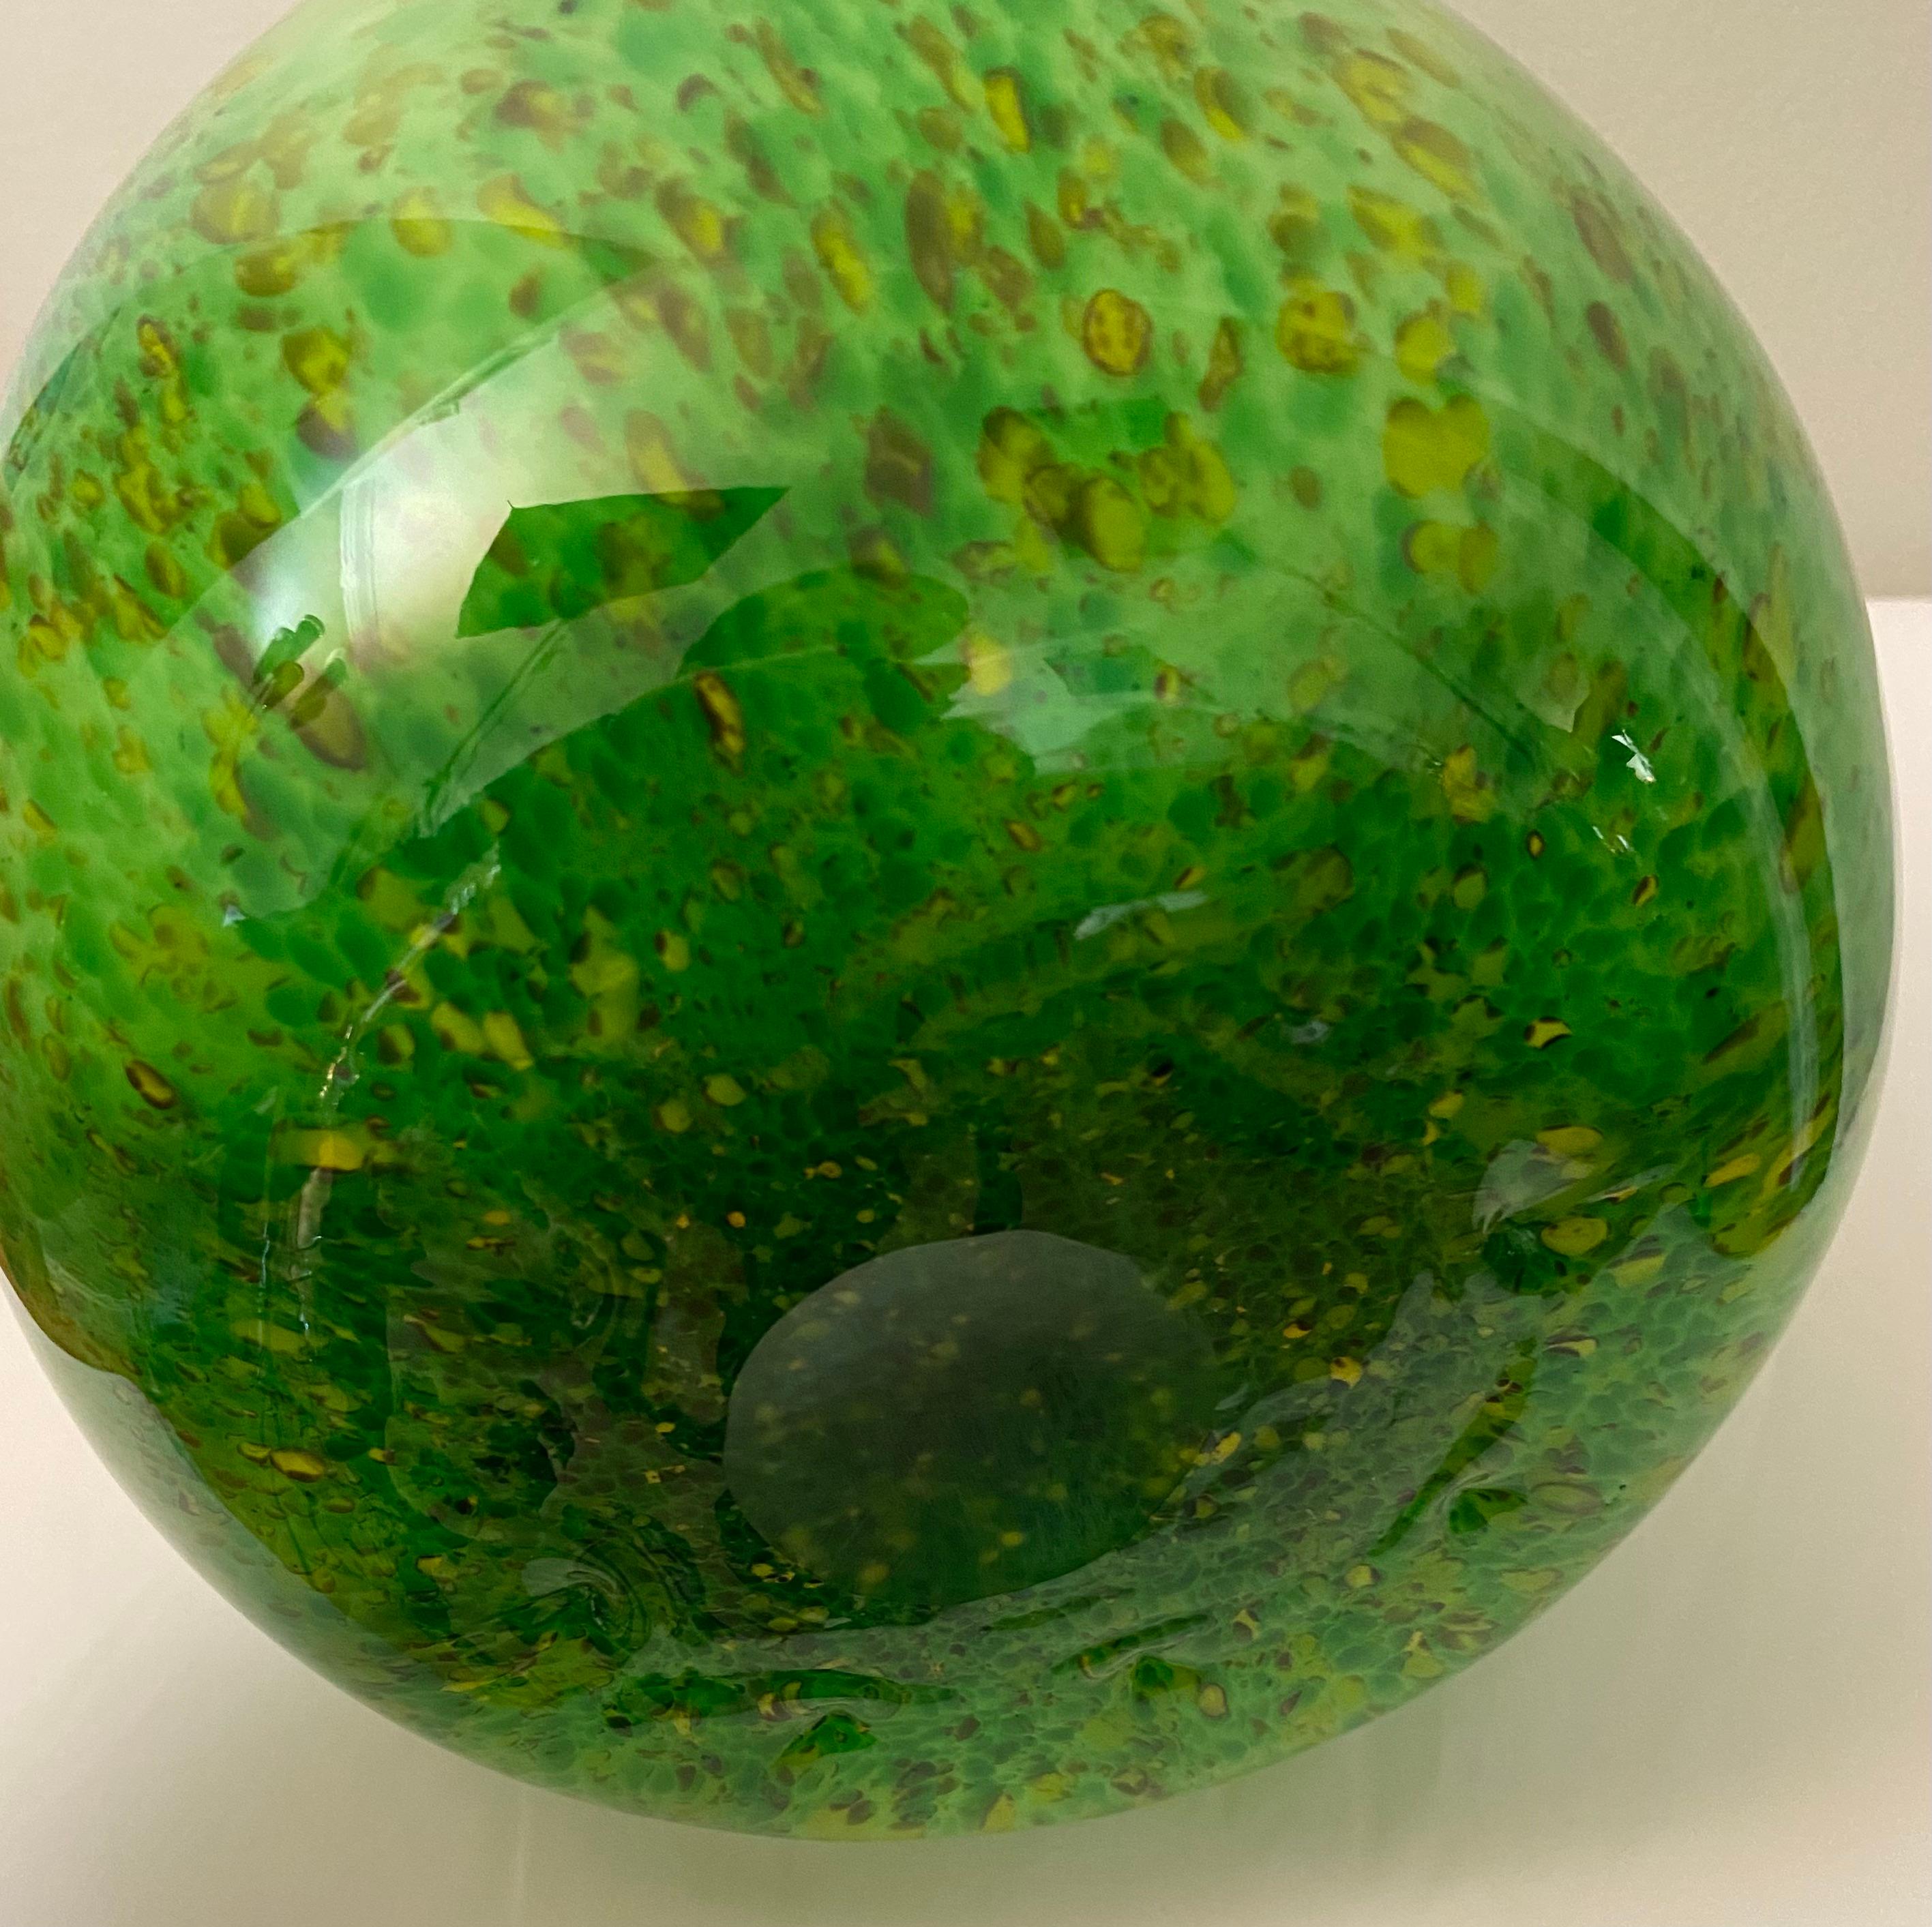 Hand-Crafted Formia 1990s Italian Green Spotted Murano Art Glass Vase Manner Hilton McConnico